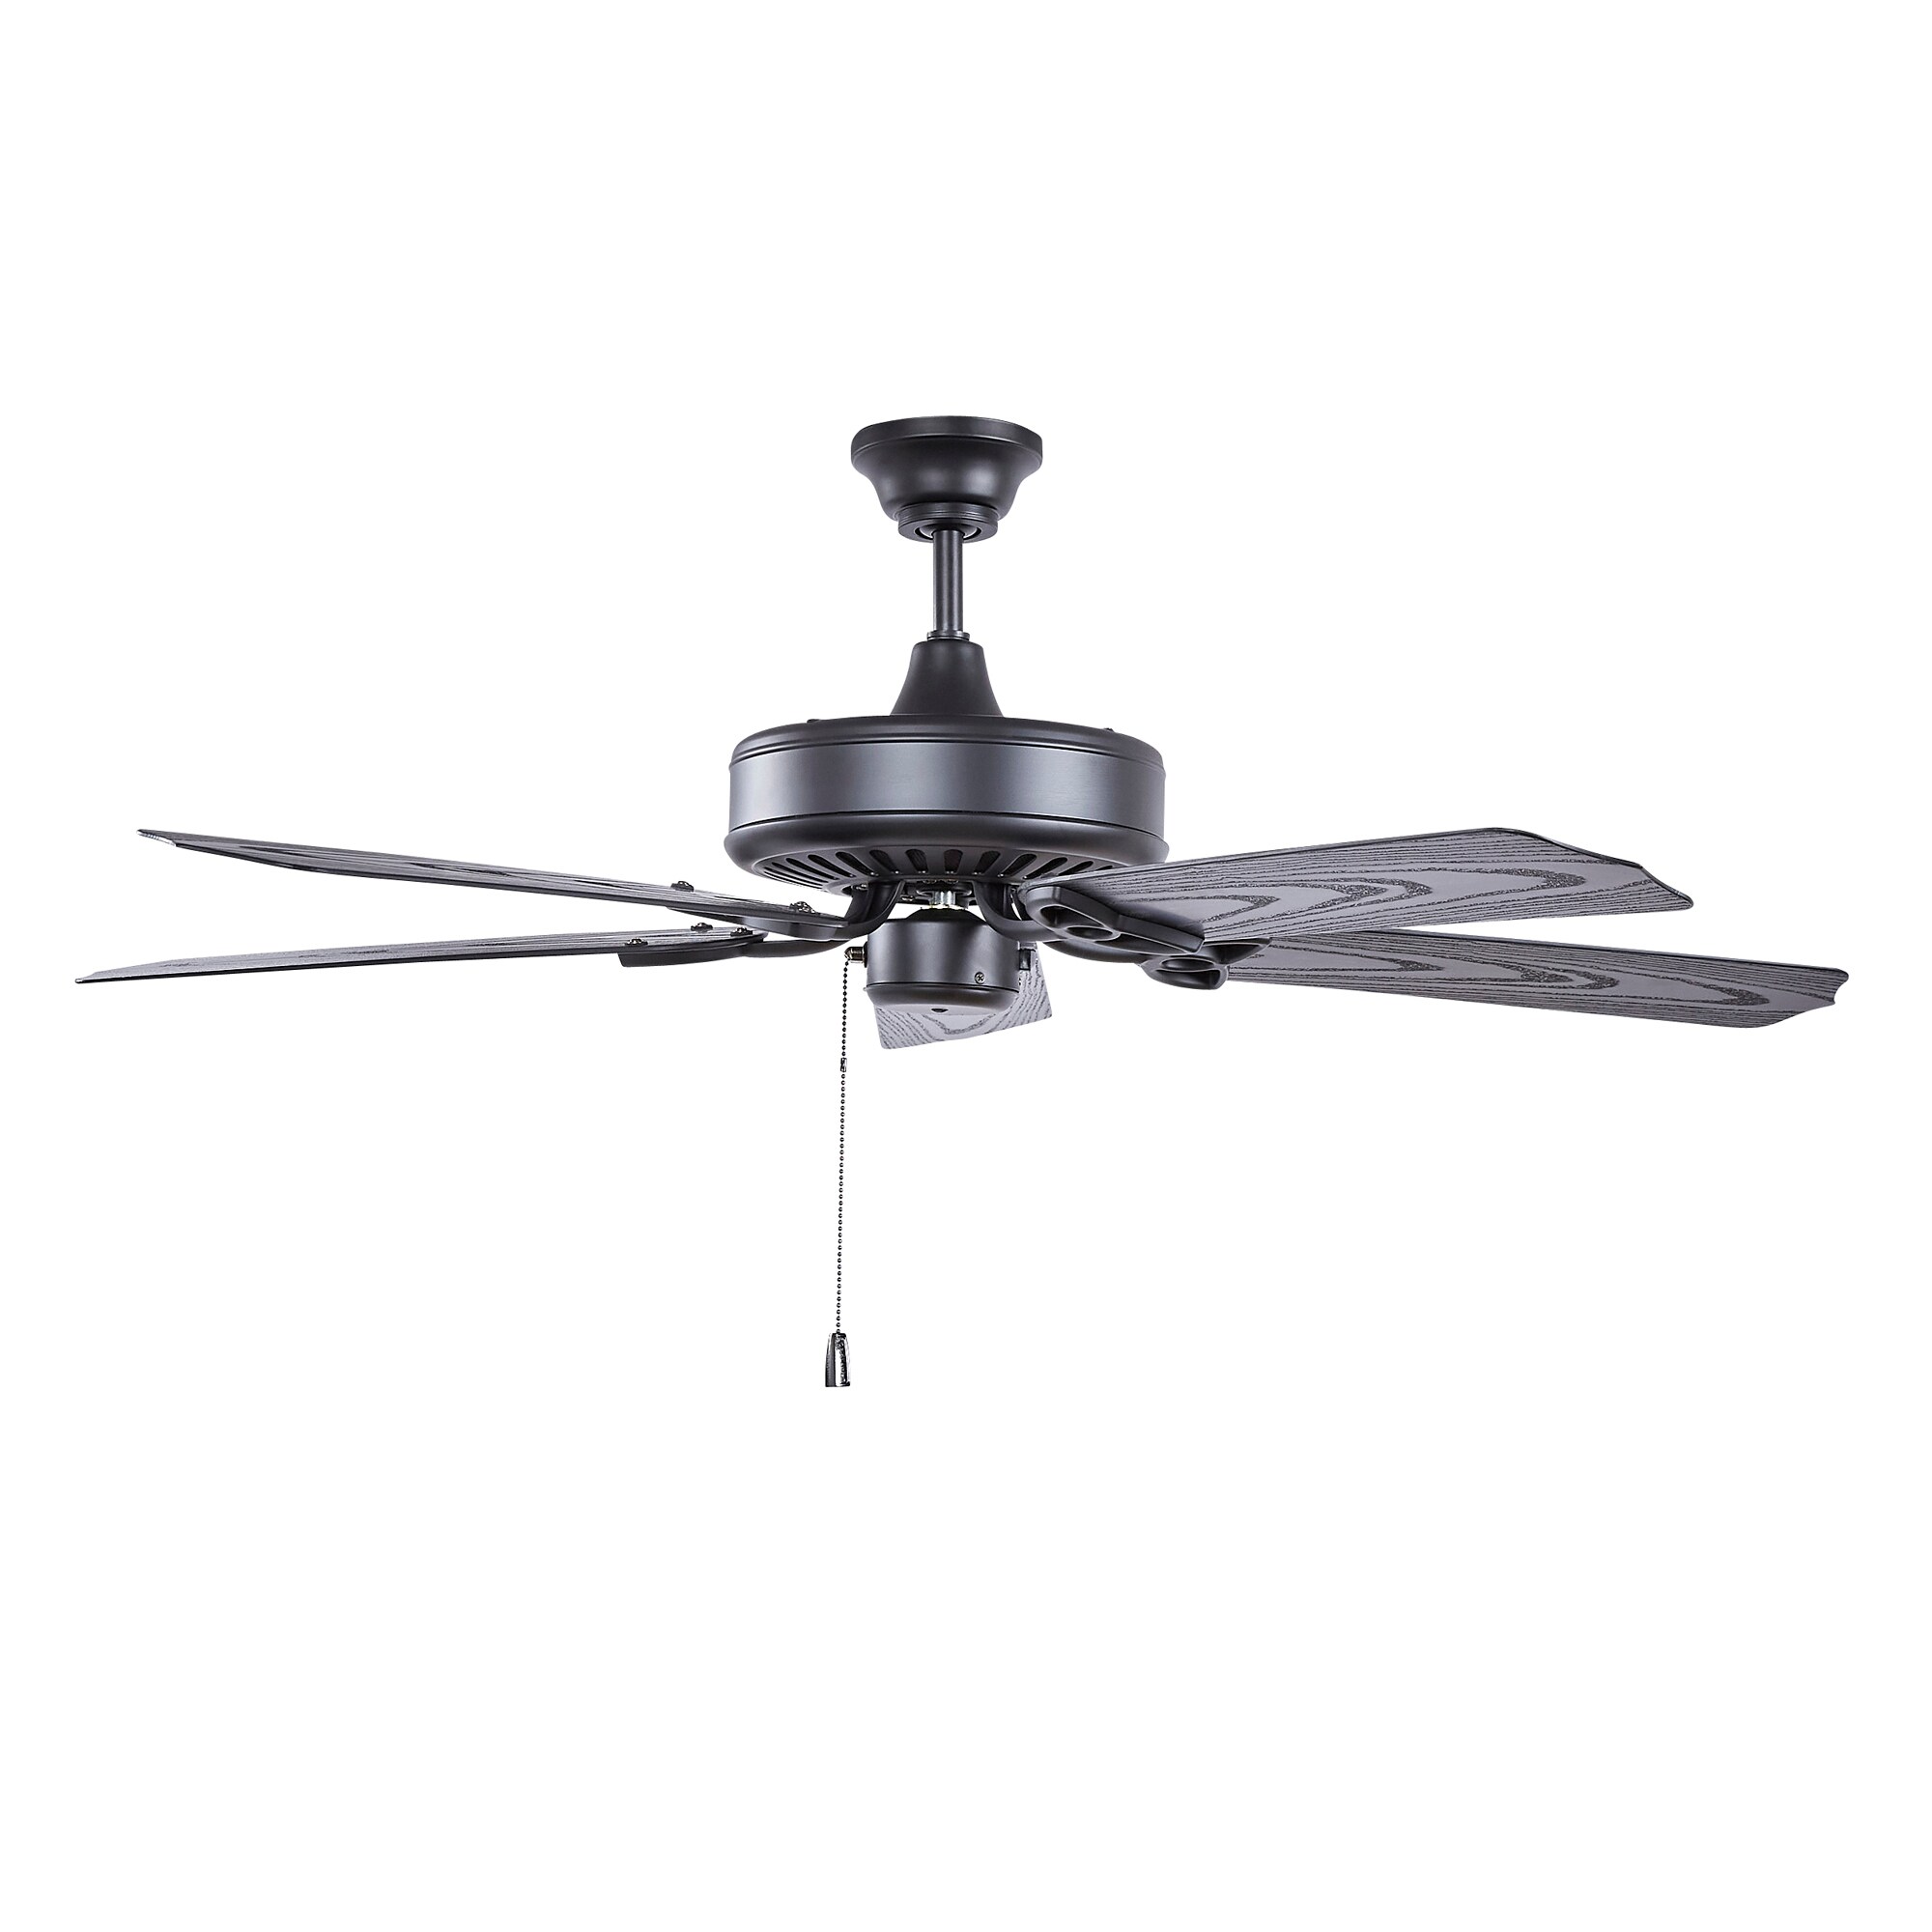 Details about   Ceiling Fan 5 Solid Wood Board Fan Blades, 52-Inch Indoor/Outdoor Ceiling Fans 